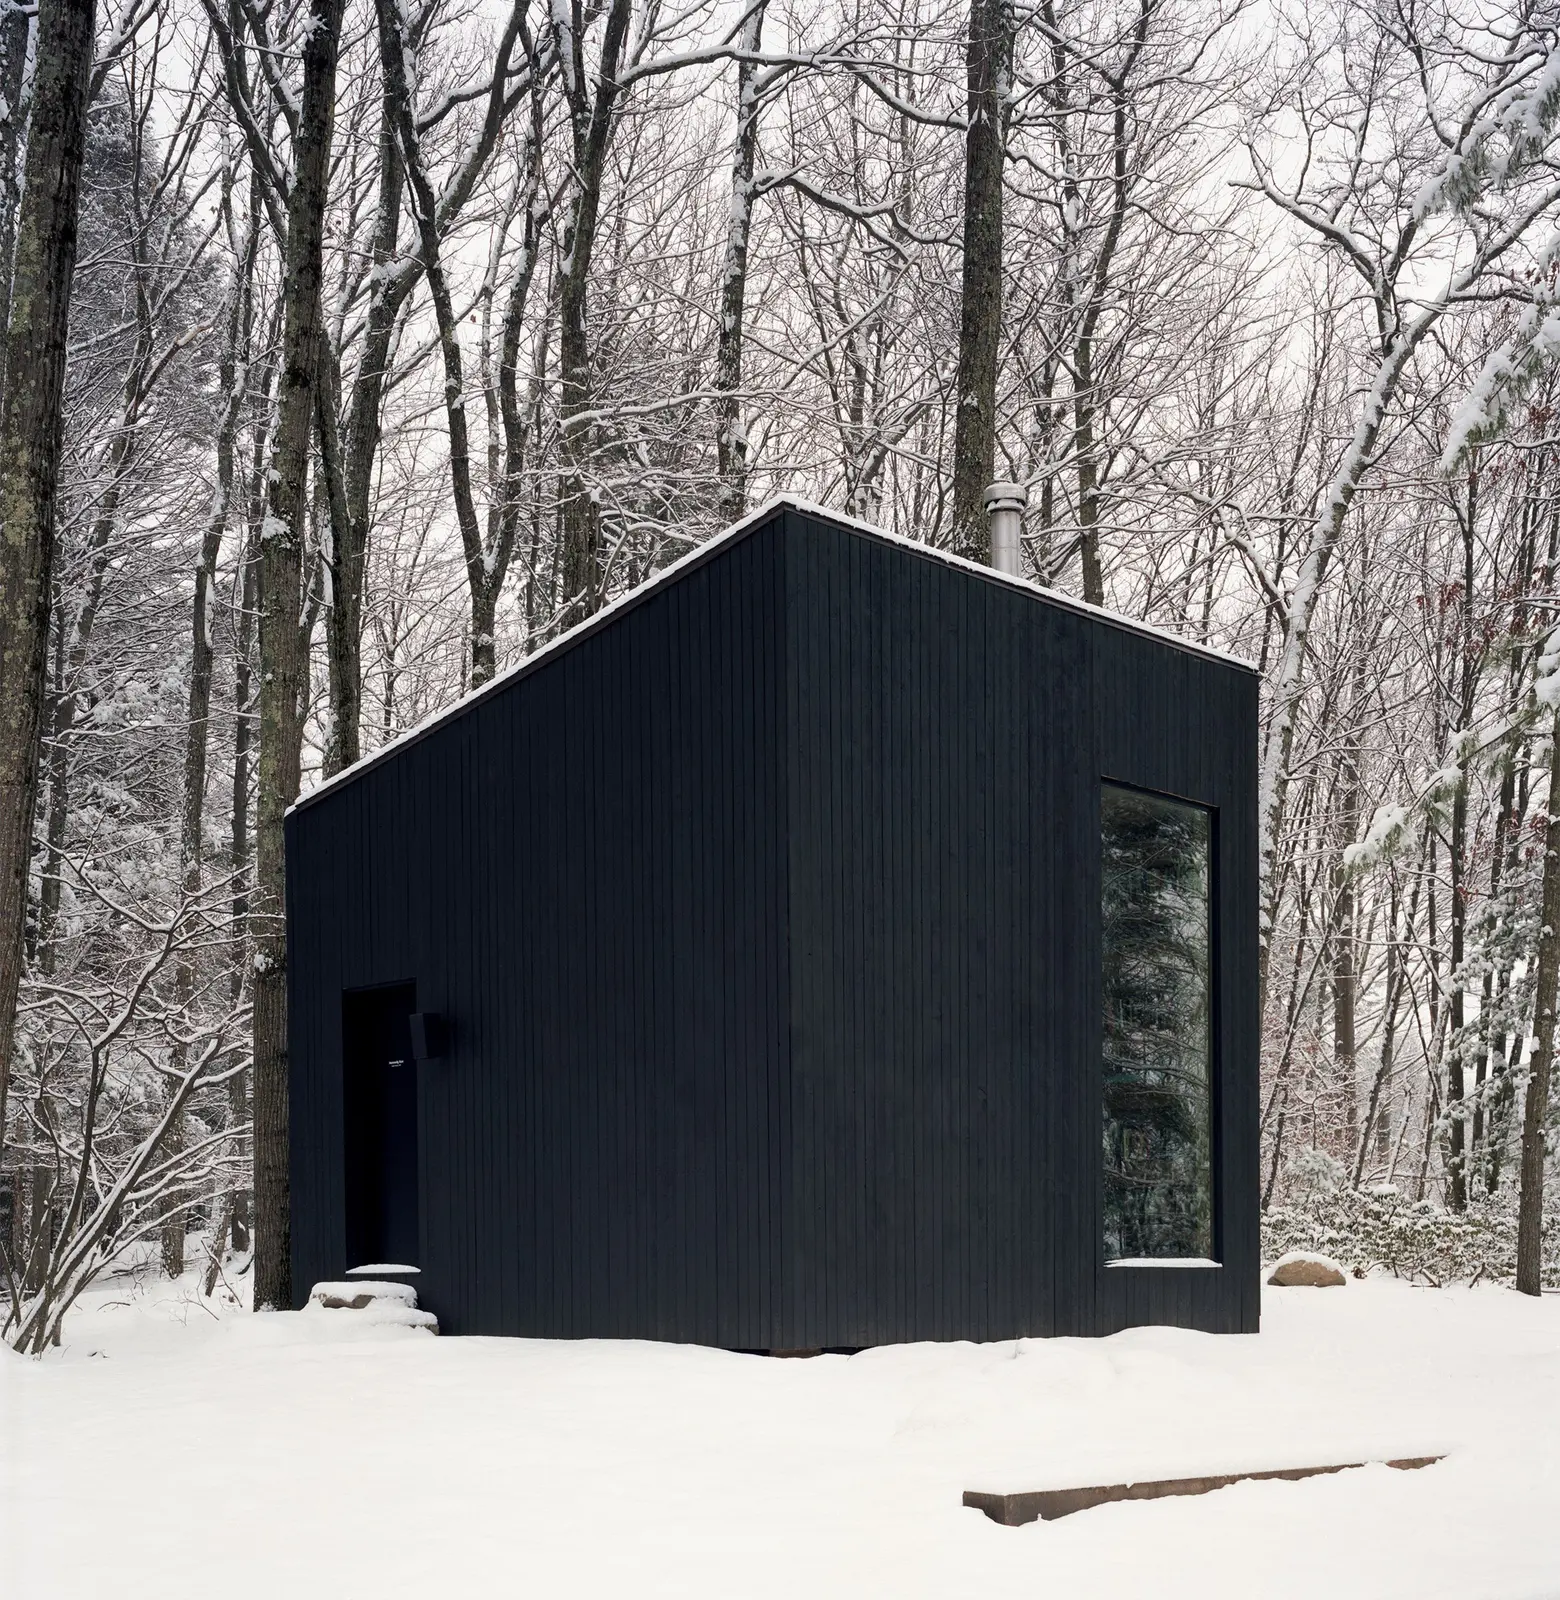 Studio Padron and SMITH Design, one room black cabin in Upstate New York. Photo by Jason Koxvold